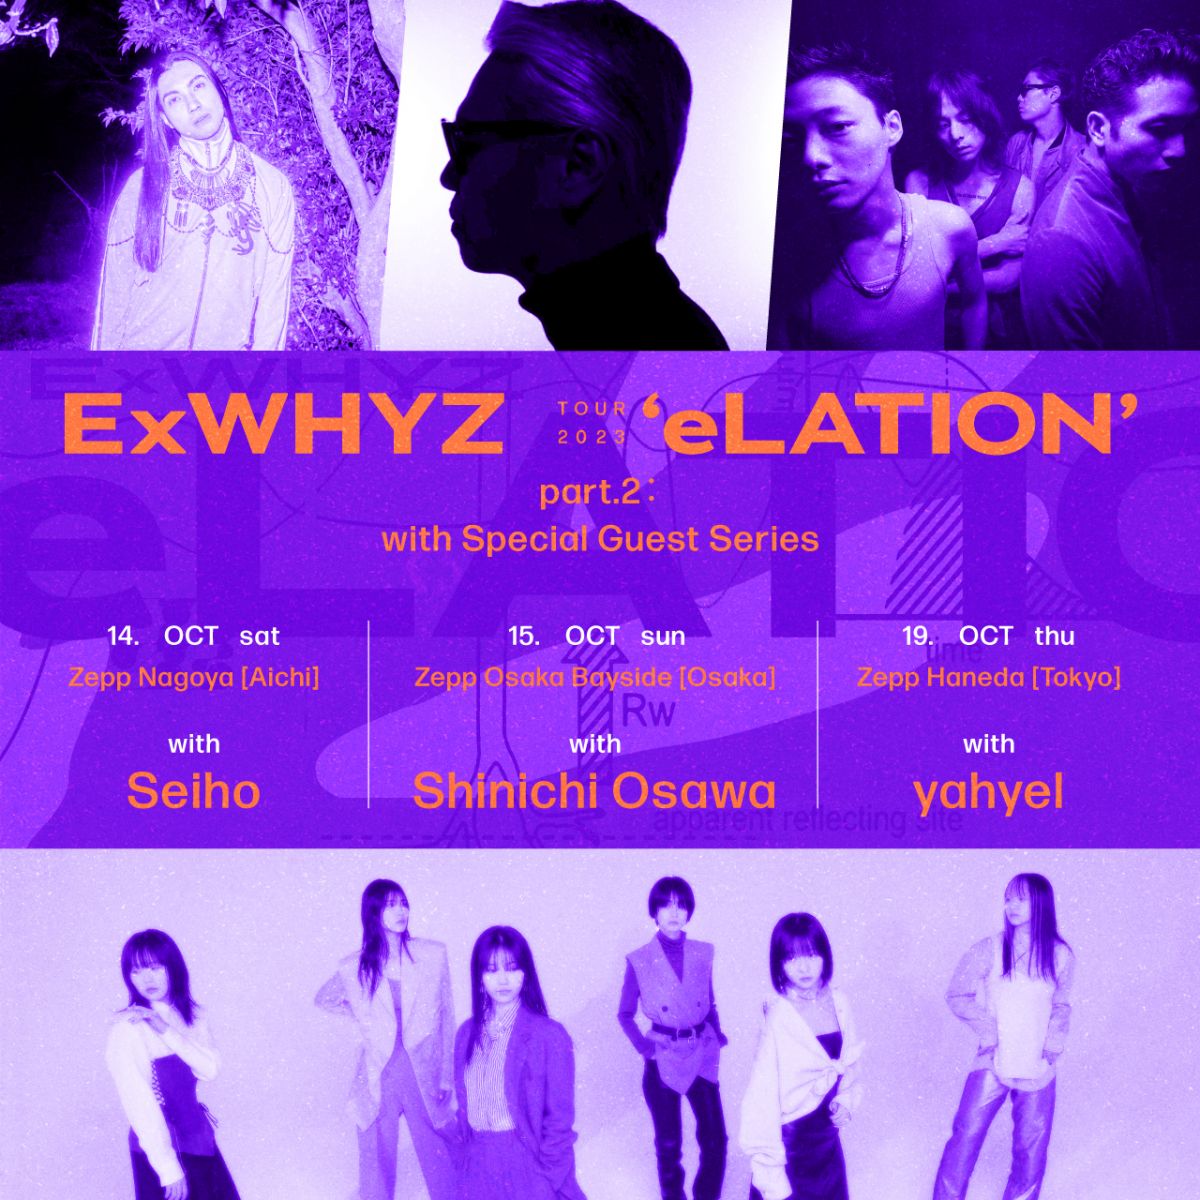 Seiho,大沢伸一,yahyel参加『ExWHYZ TOUR 2023 ‘eLATION’ part.2:with Special Guest Series』開催決定！